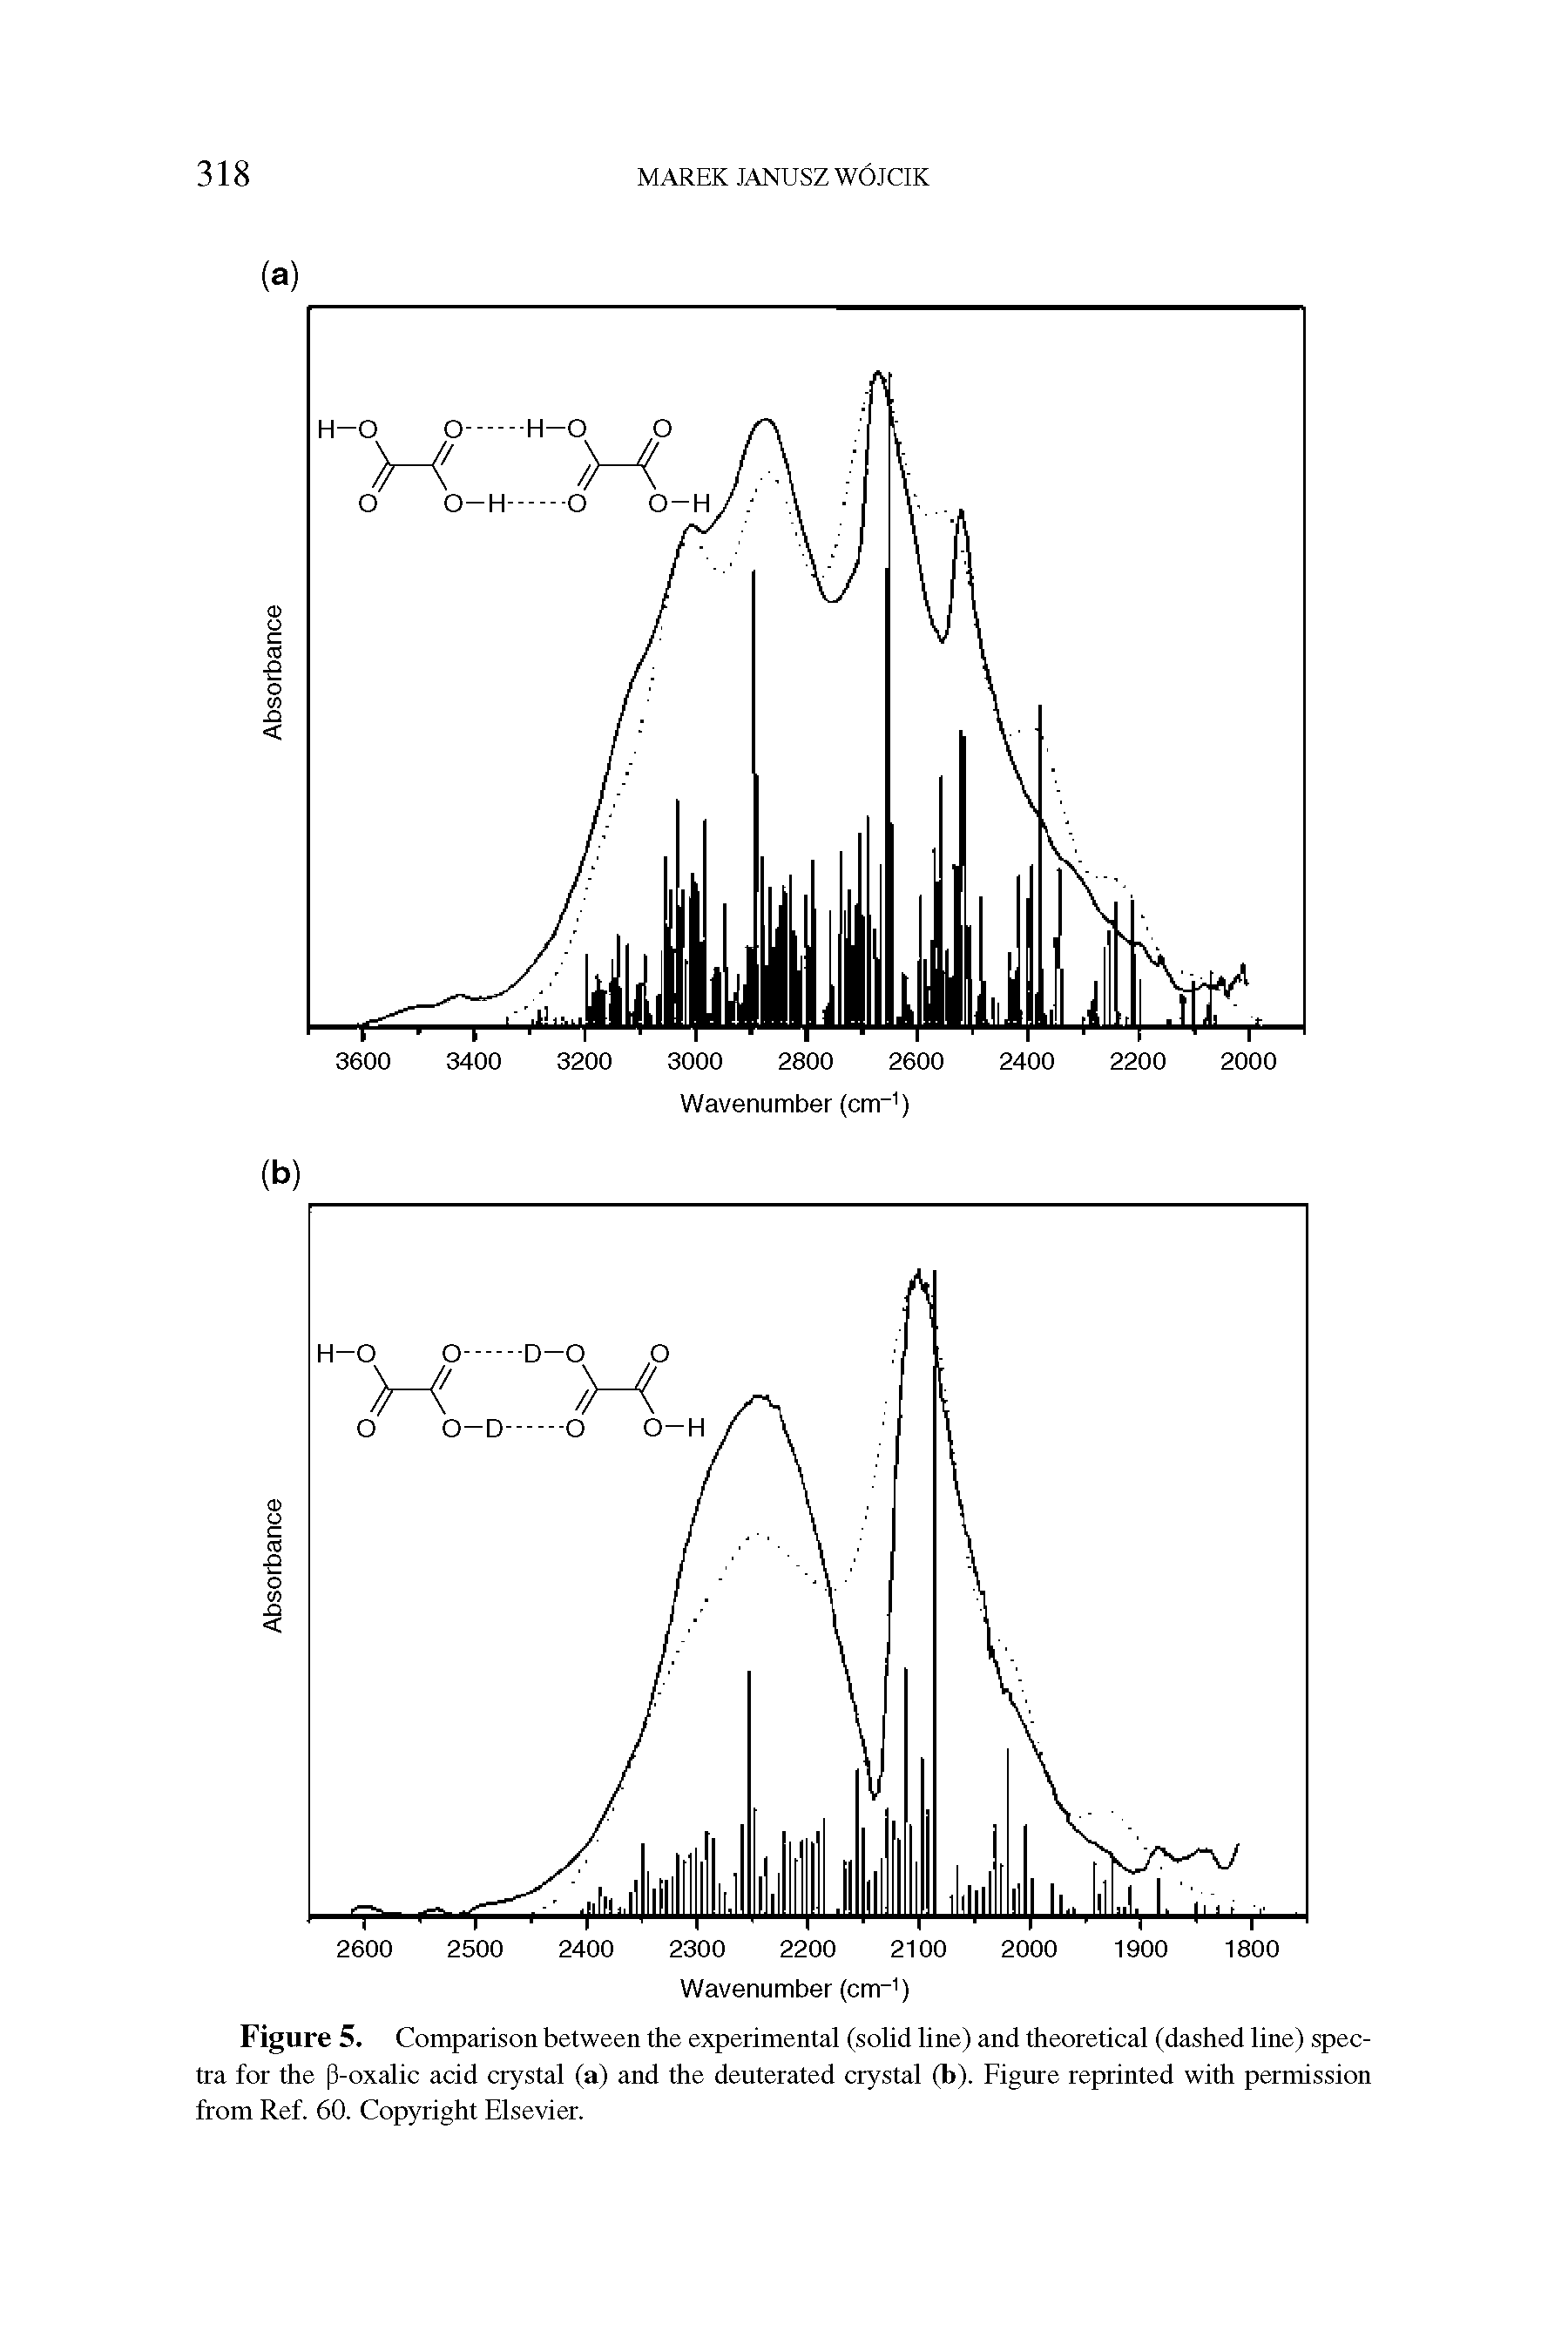 Figure 5. Comparison between the experimental (solid line) and theoretical (dashed line) spectra for the p-oxalic acid crystal (a) and the deuterated crystal (b). Figure reprinted with permission from Ref. 60. Copyright Elsevier.